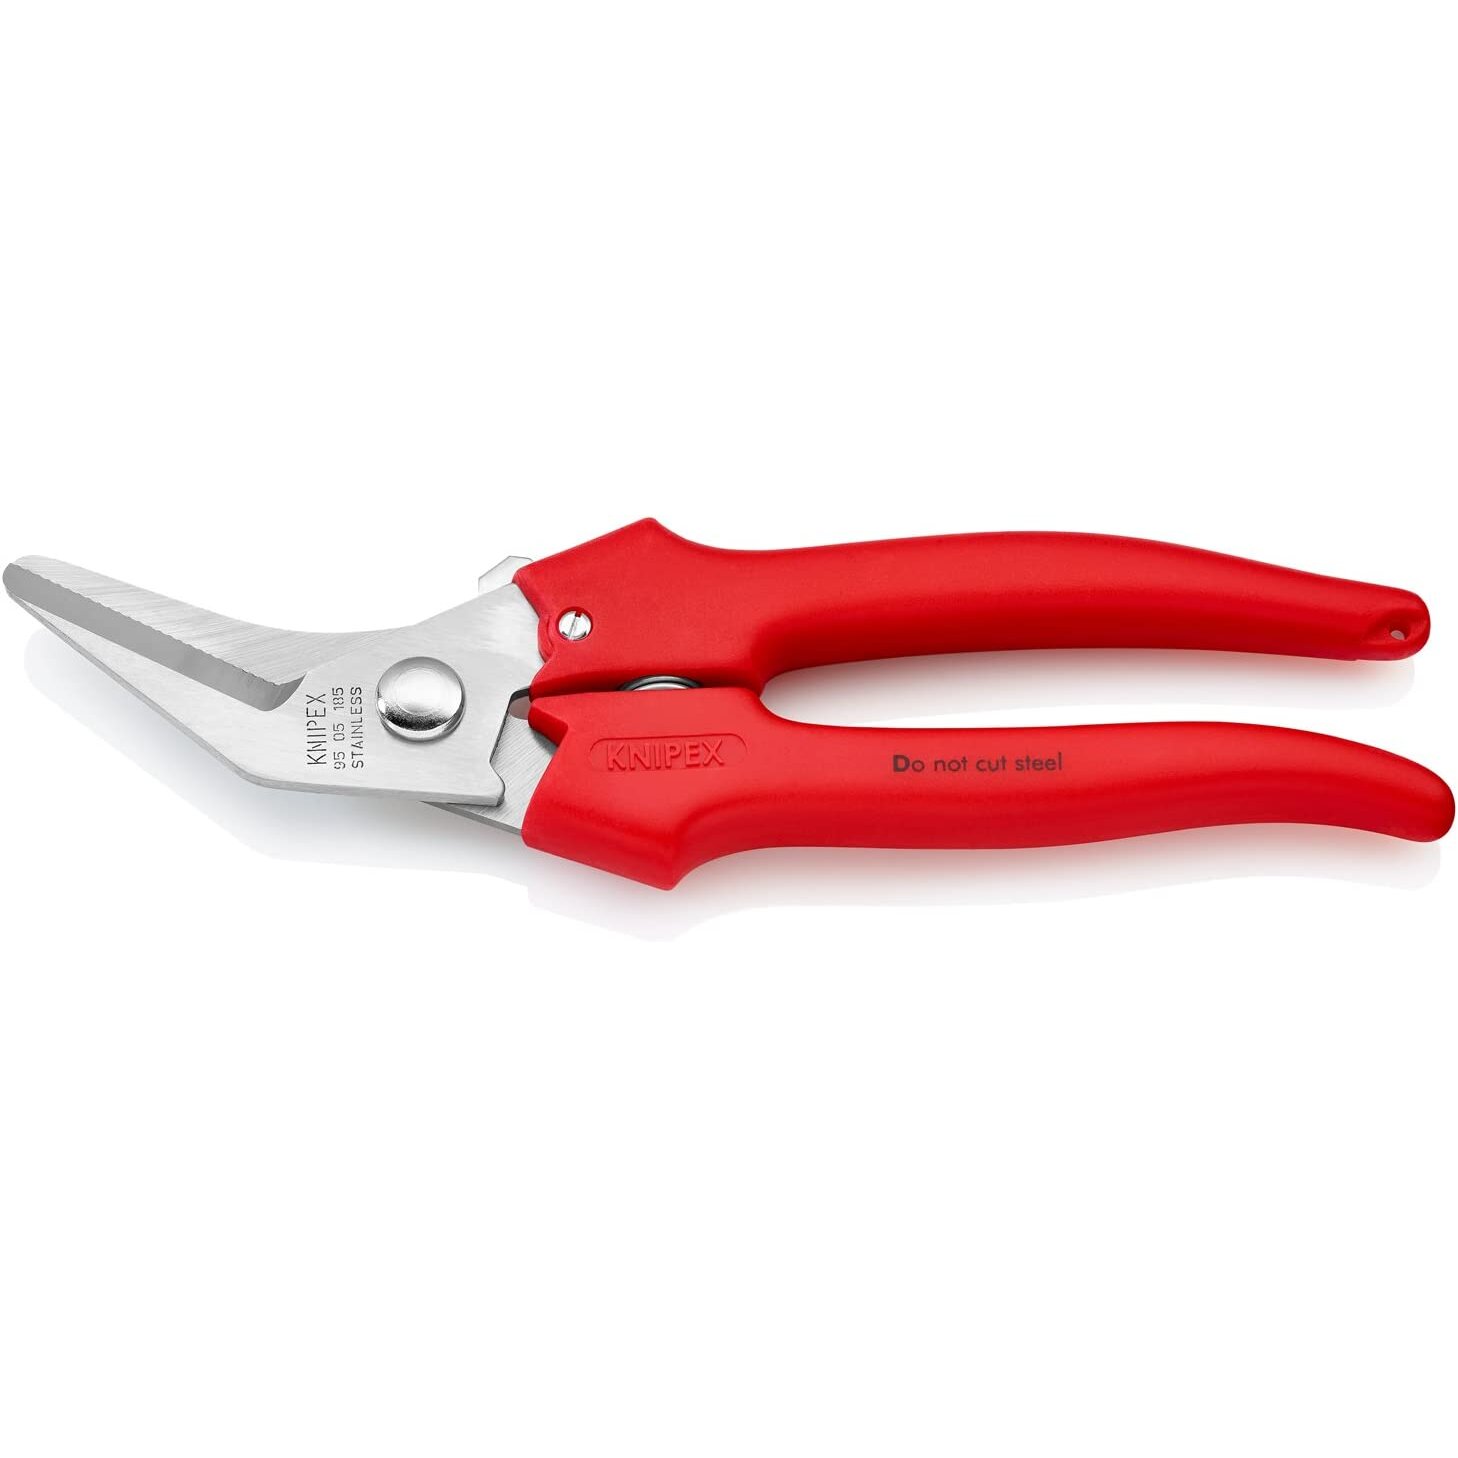 KNIPEX Combination Shears (185 mm) 95 05 185